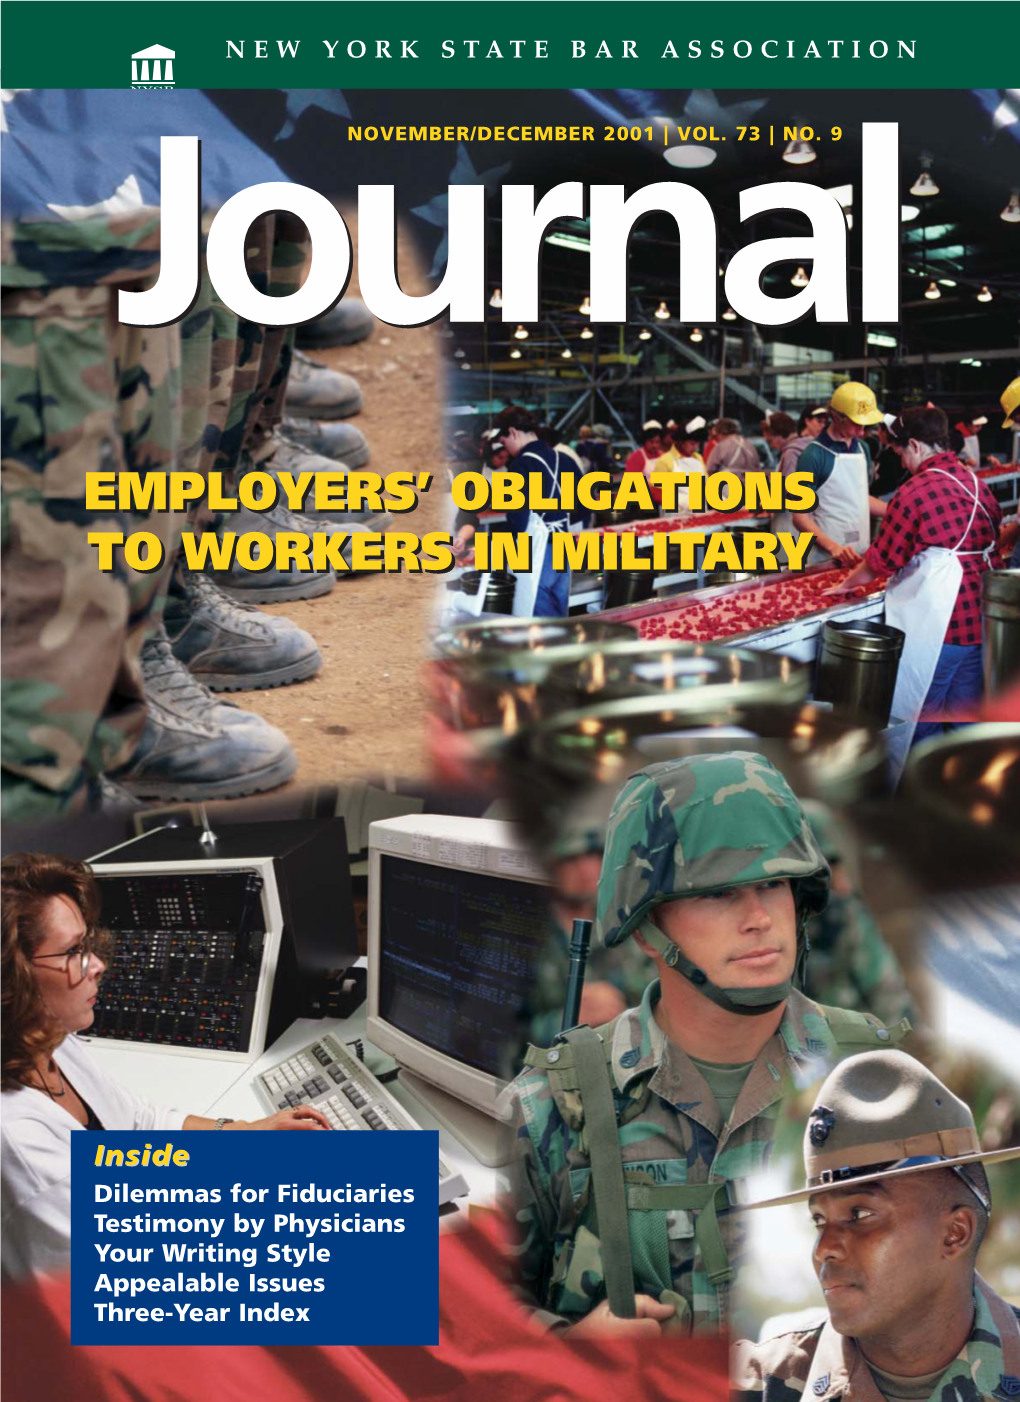 Employers' Obligations to Workers in Military